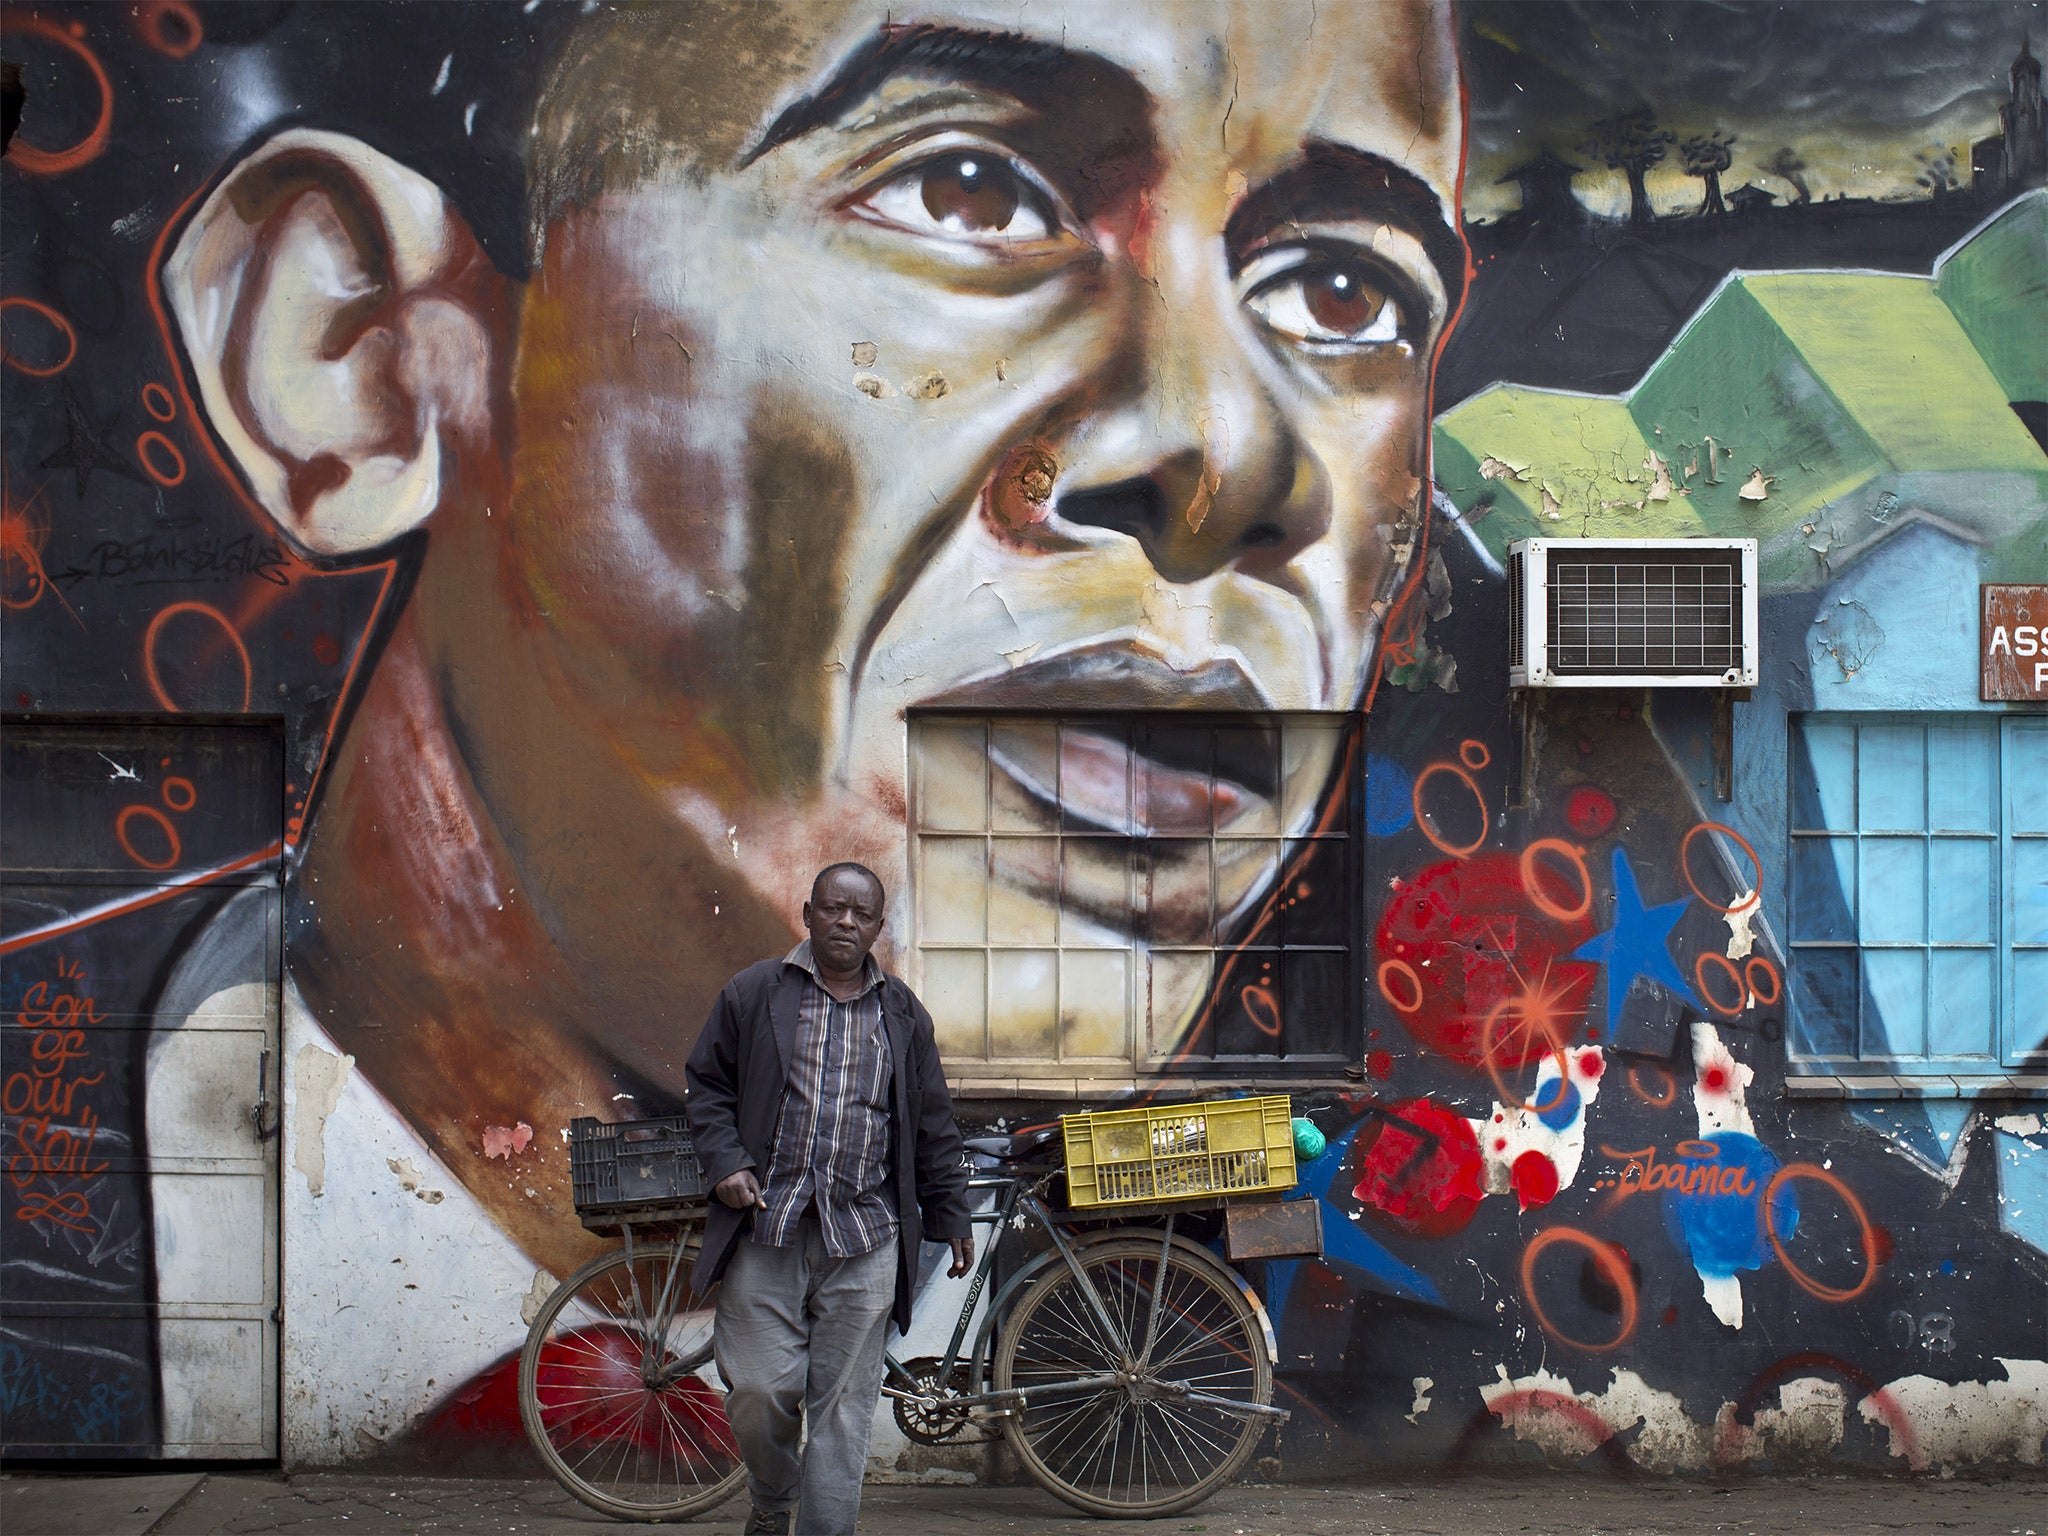 A mural of President Obama, created by the Kenyan graffiti artist Bankslave, at the GoDown Arts Centre in Nairobi